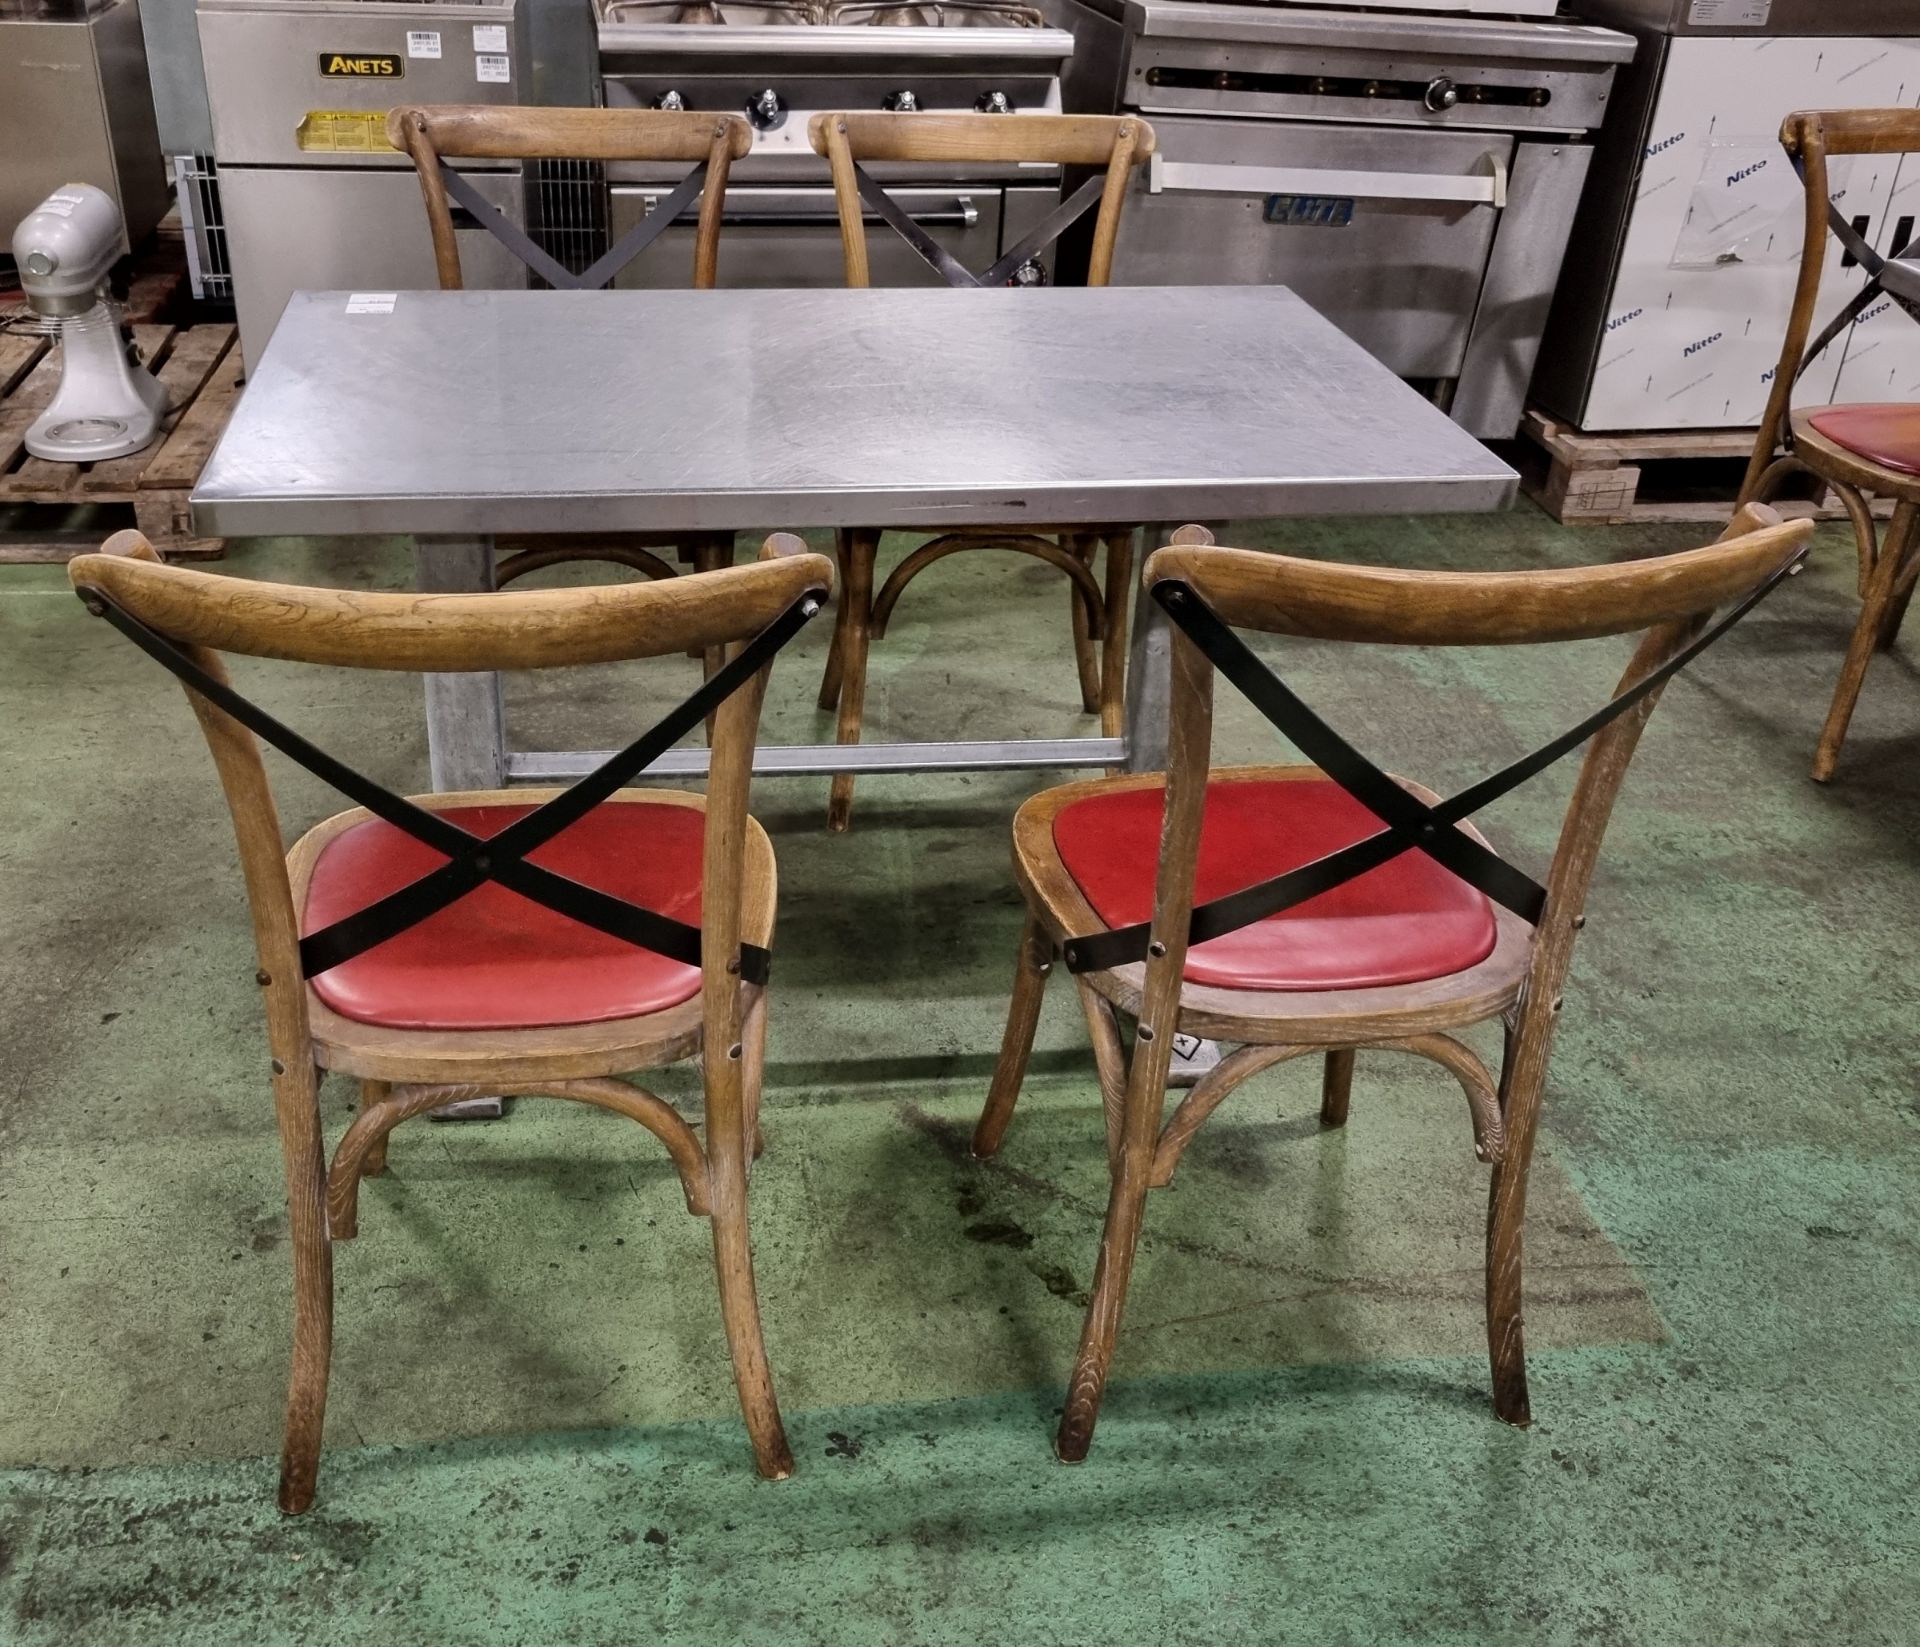 4x Wooden restaurant chairs, Metal table - W 1200 x D 690 x H 760 mm - Image 2 of 5